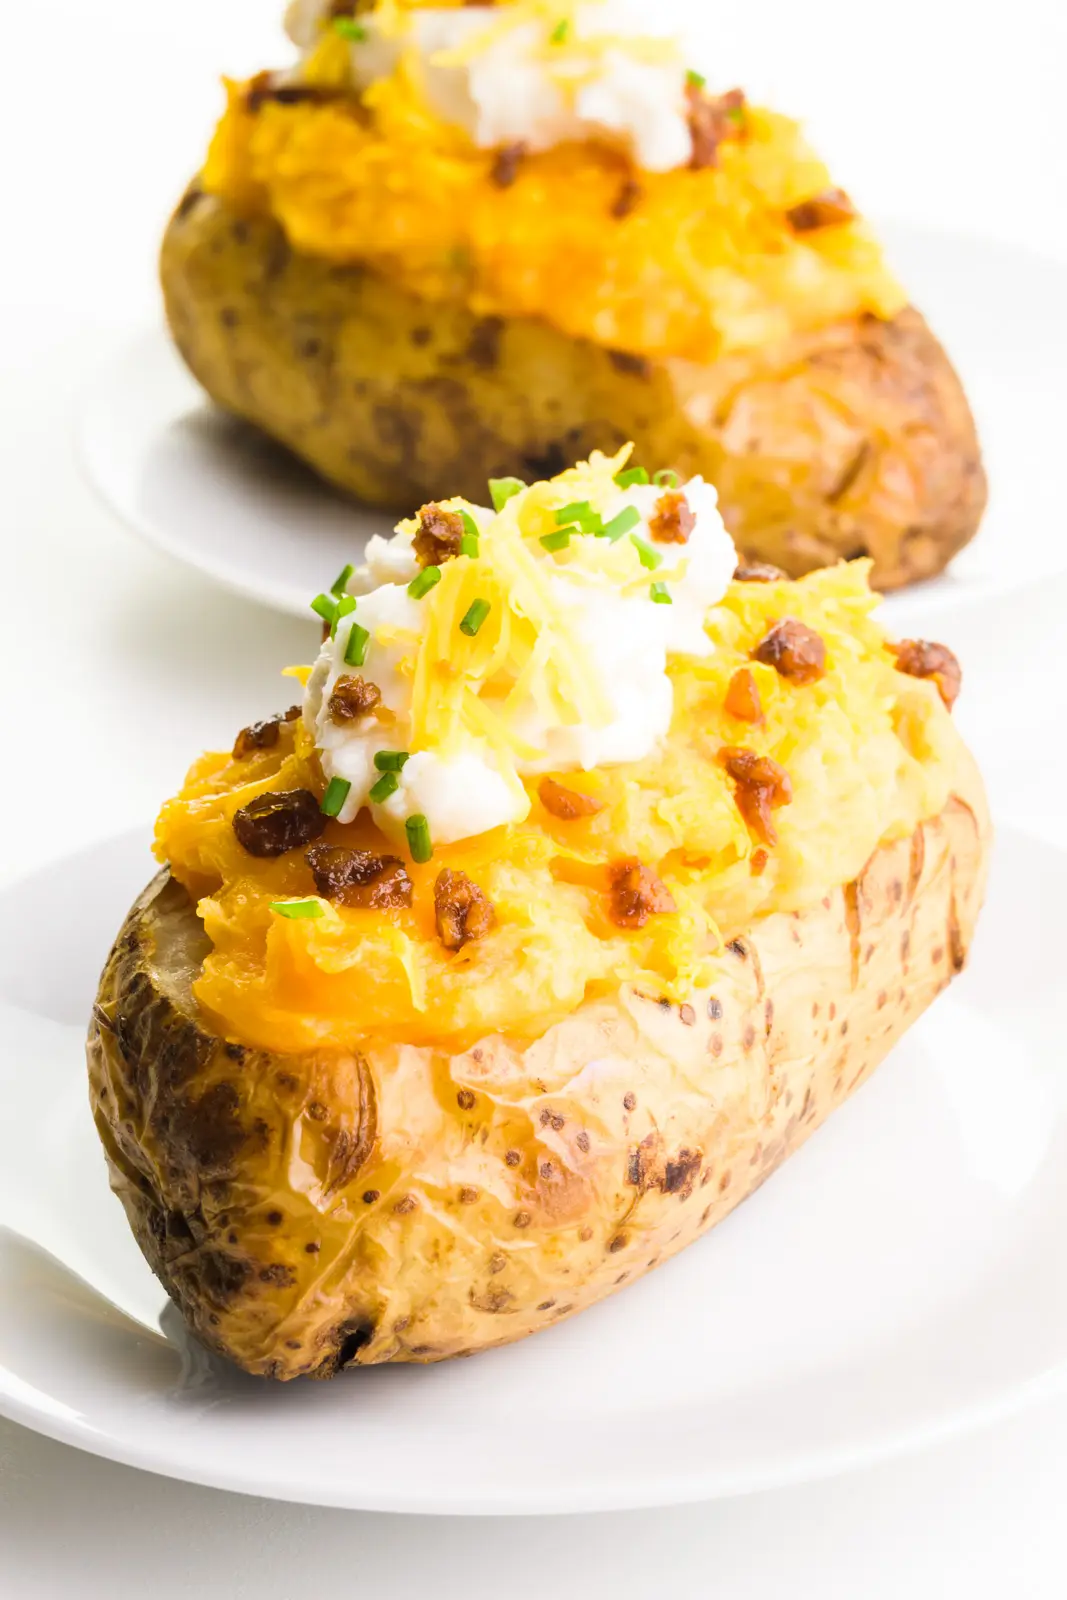 Two vegan twice baked potatoes sit on plates, with vegan bacon, sour cream, and cheese on top.